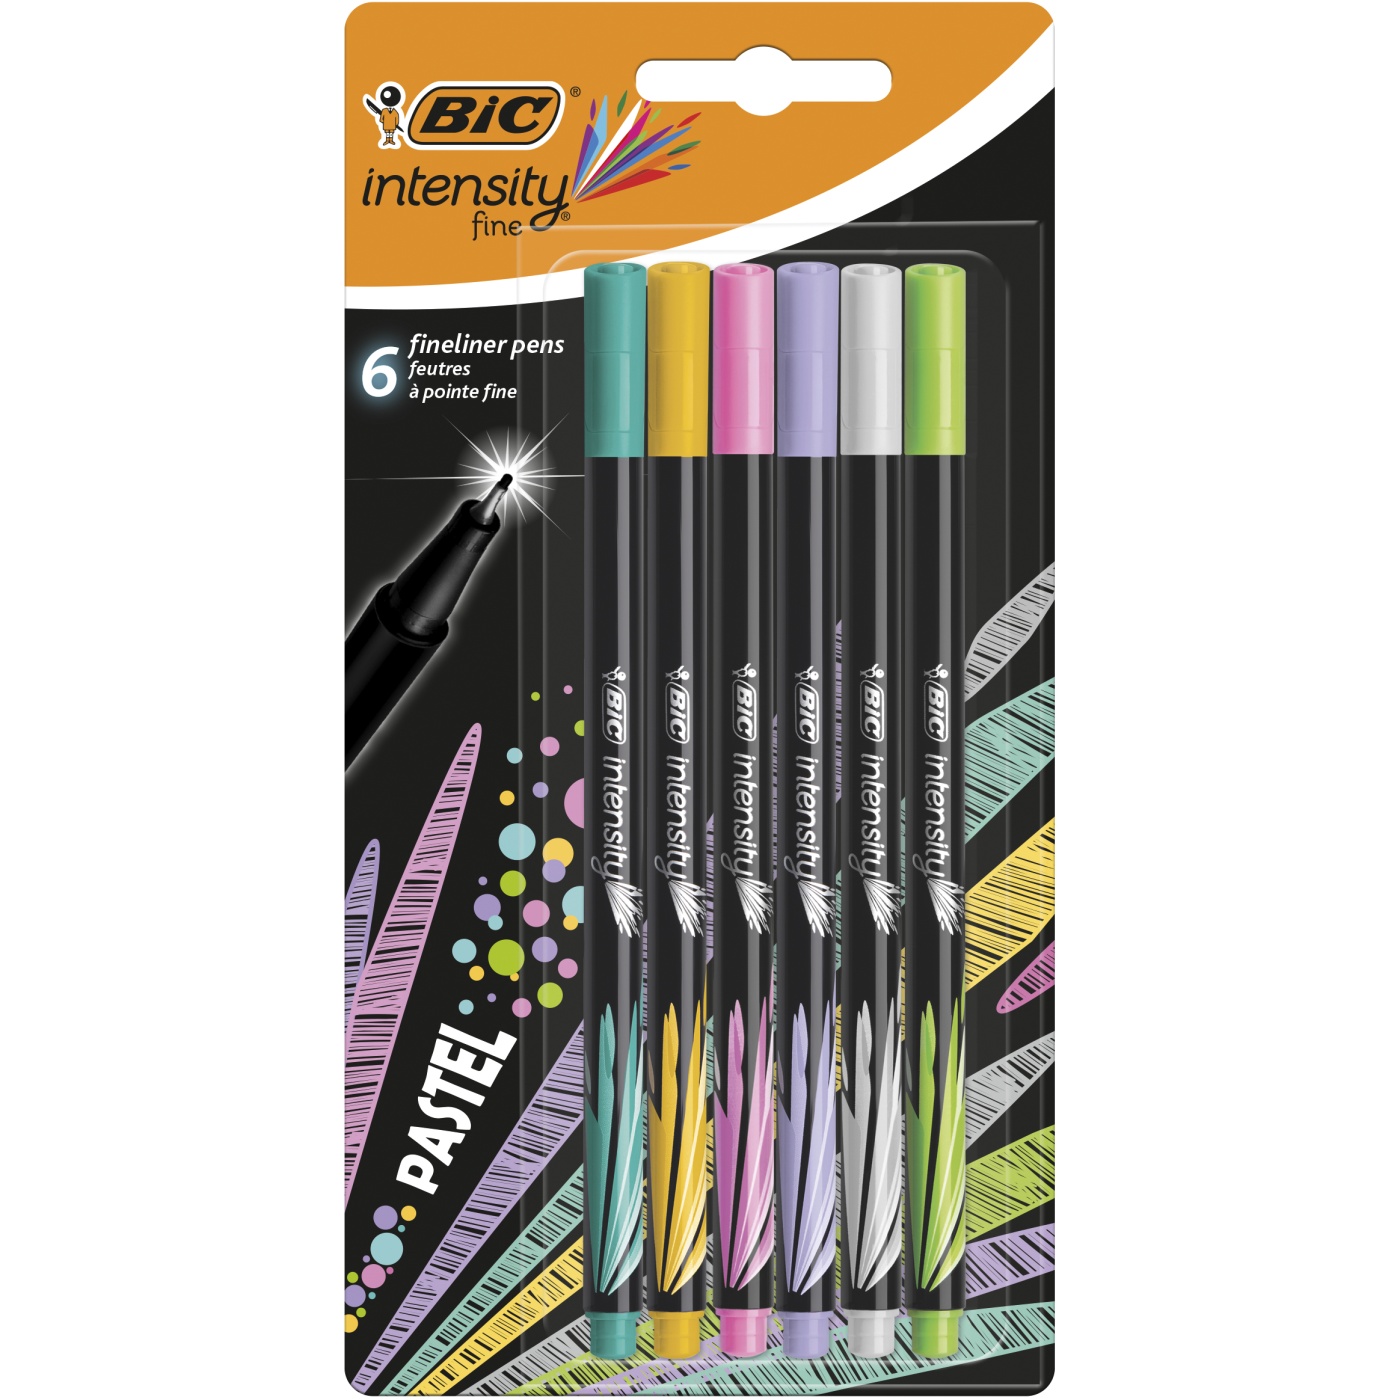 Bic Intensity Colouring Felt Tip Pens for Adults, Multicolour, 24 Pack